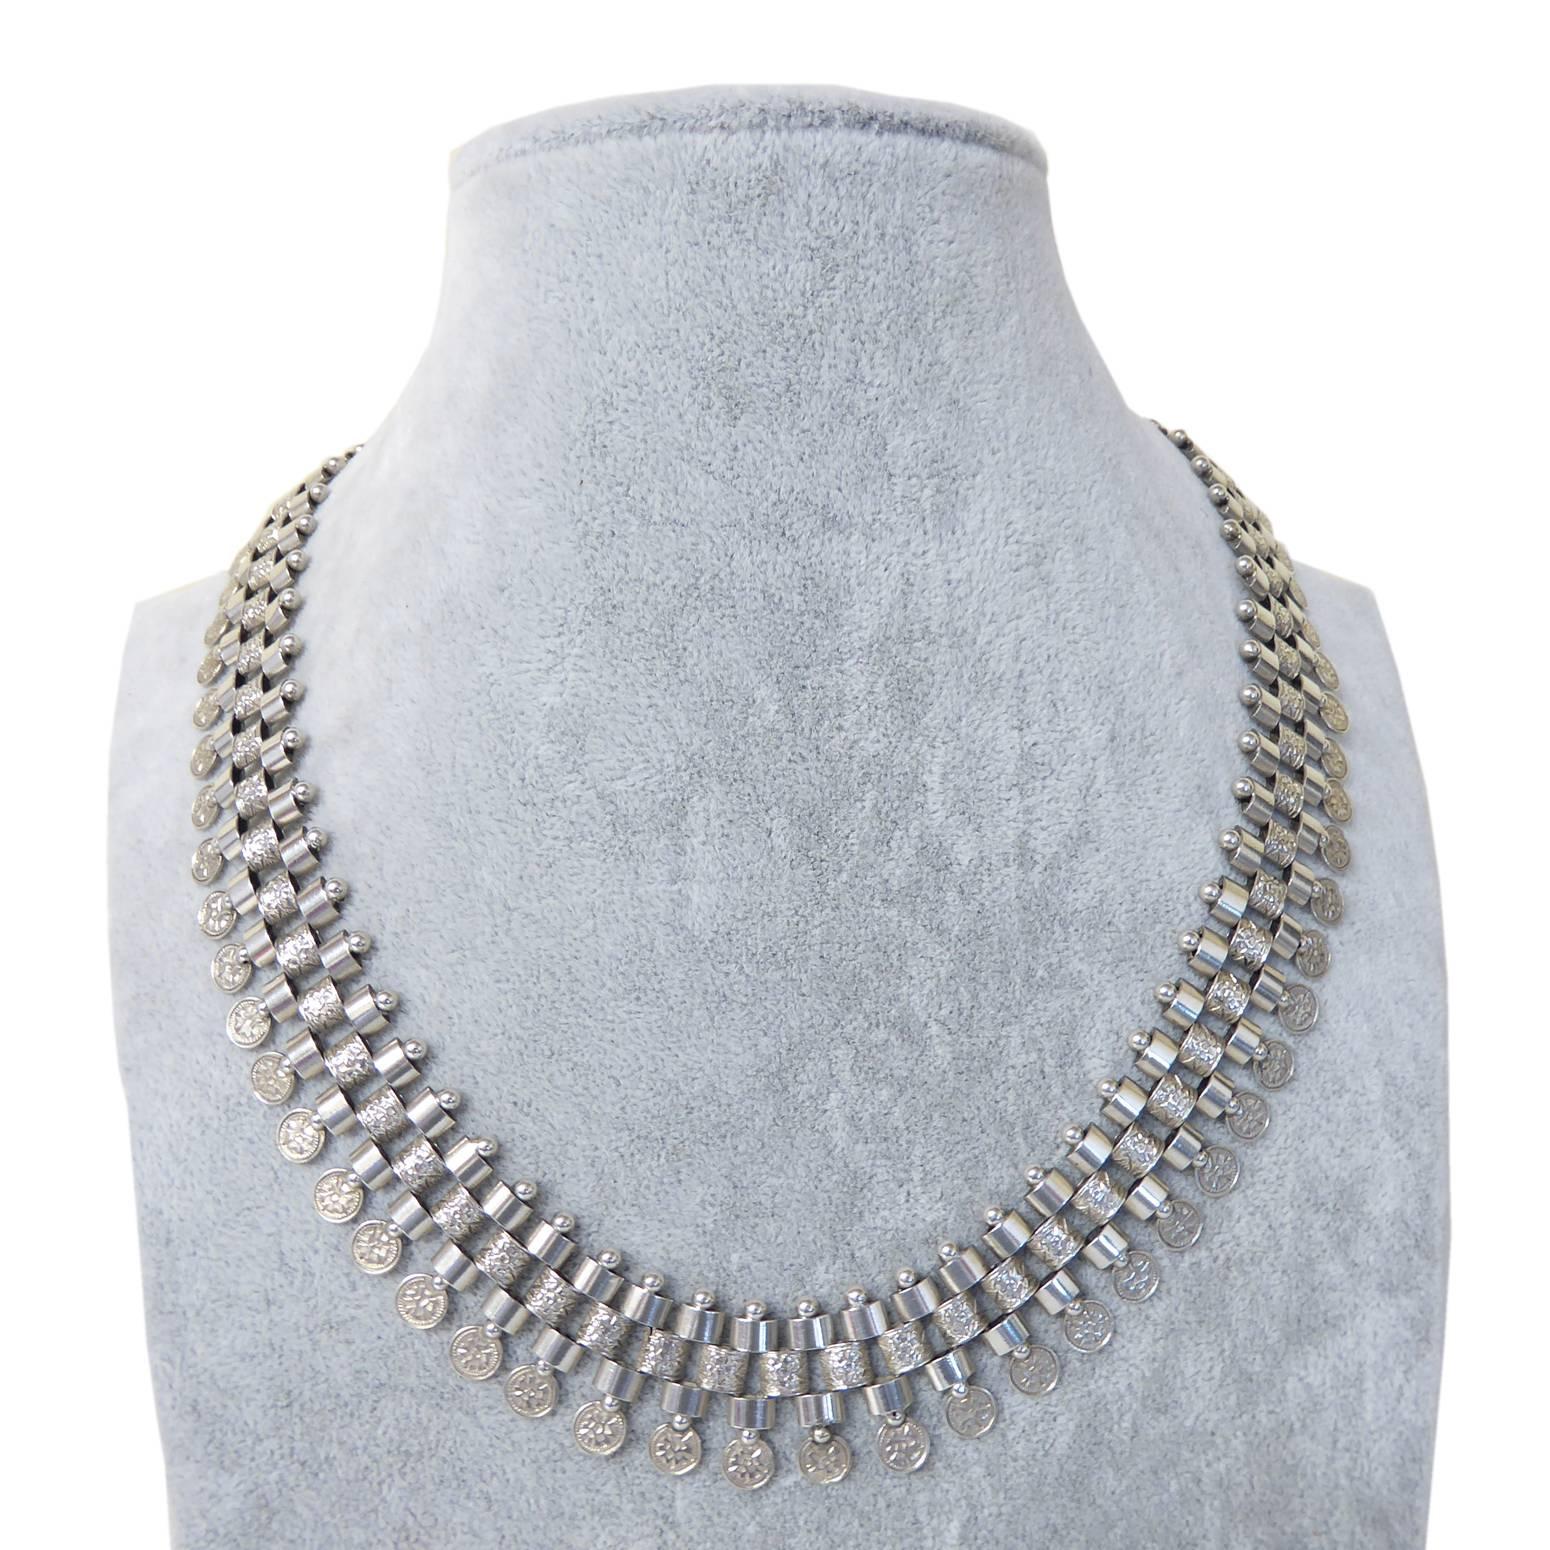 An imposing collar style necklace typical of the Victorian era from which it dates.  Two rows of plain polished links are separated by a patterned link row in a brick style.  The plain polished links are bevelled to one side whilst the other is flat